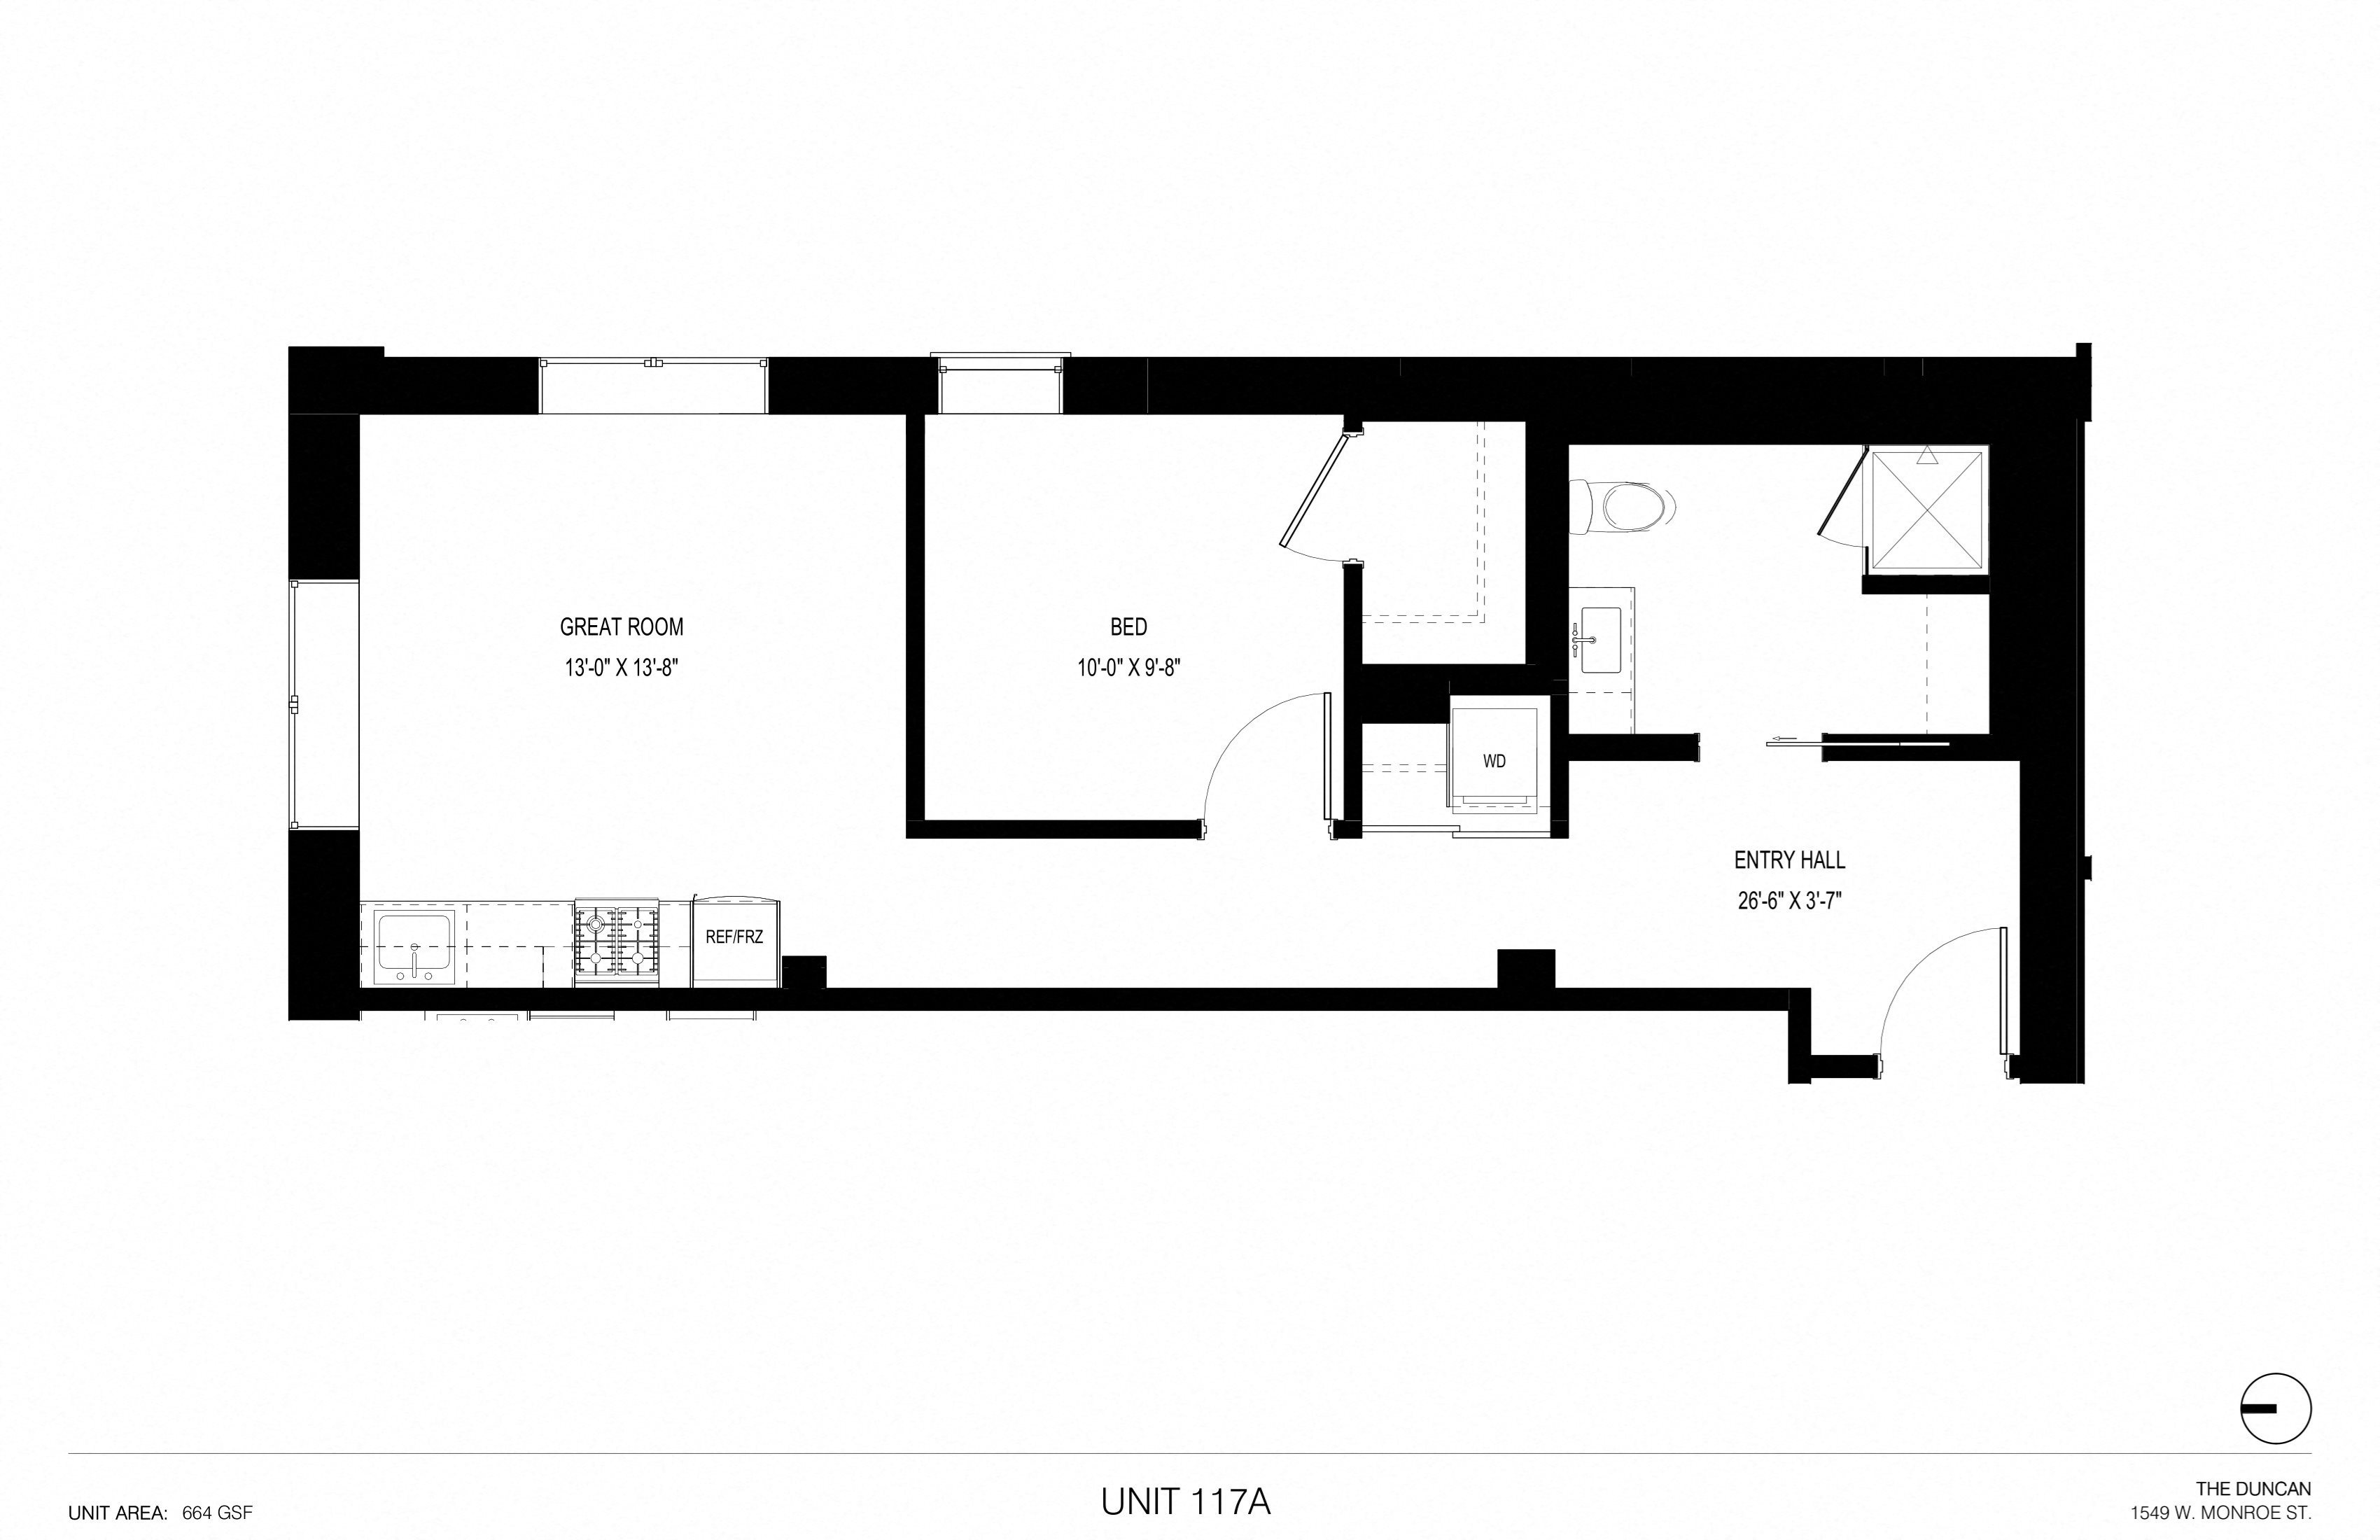 Floor Plans of The Duncan in Chicago, IL